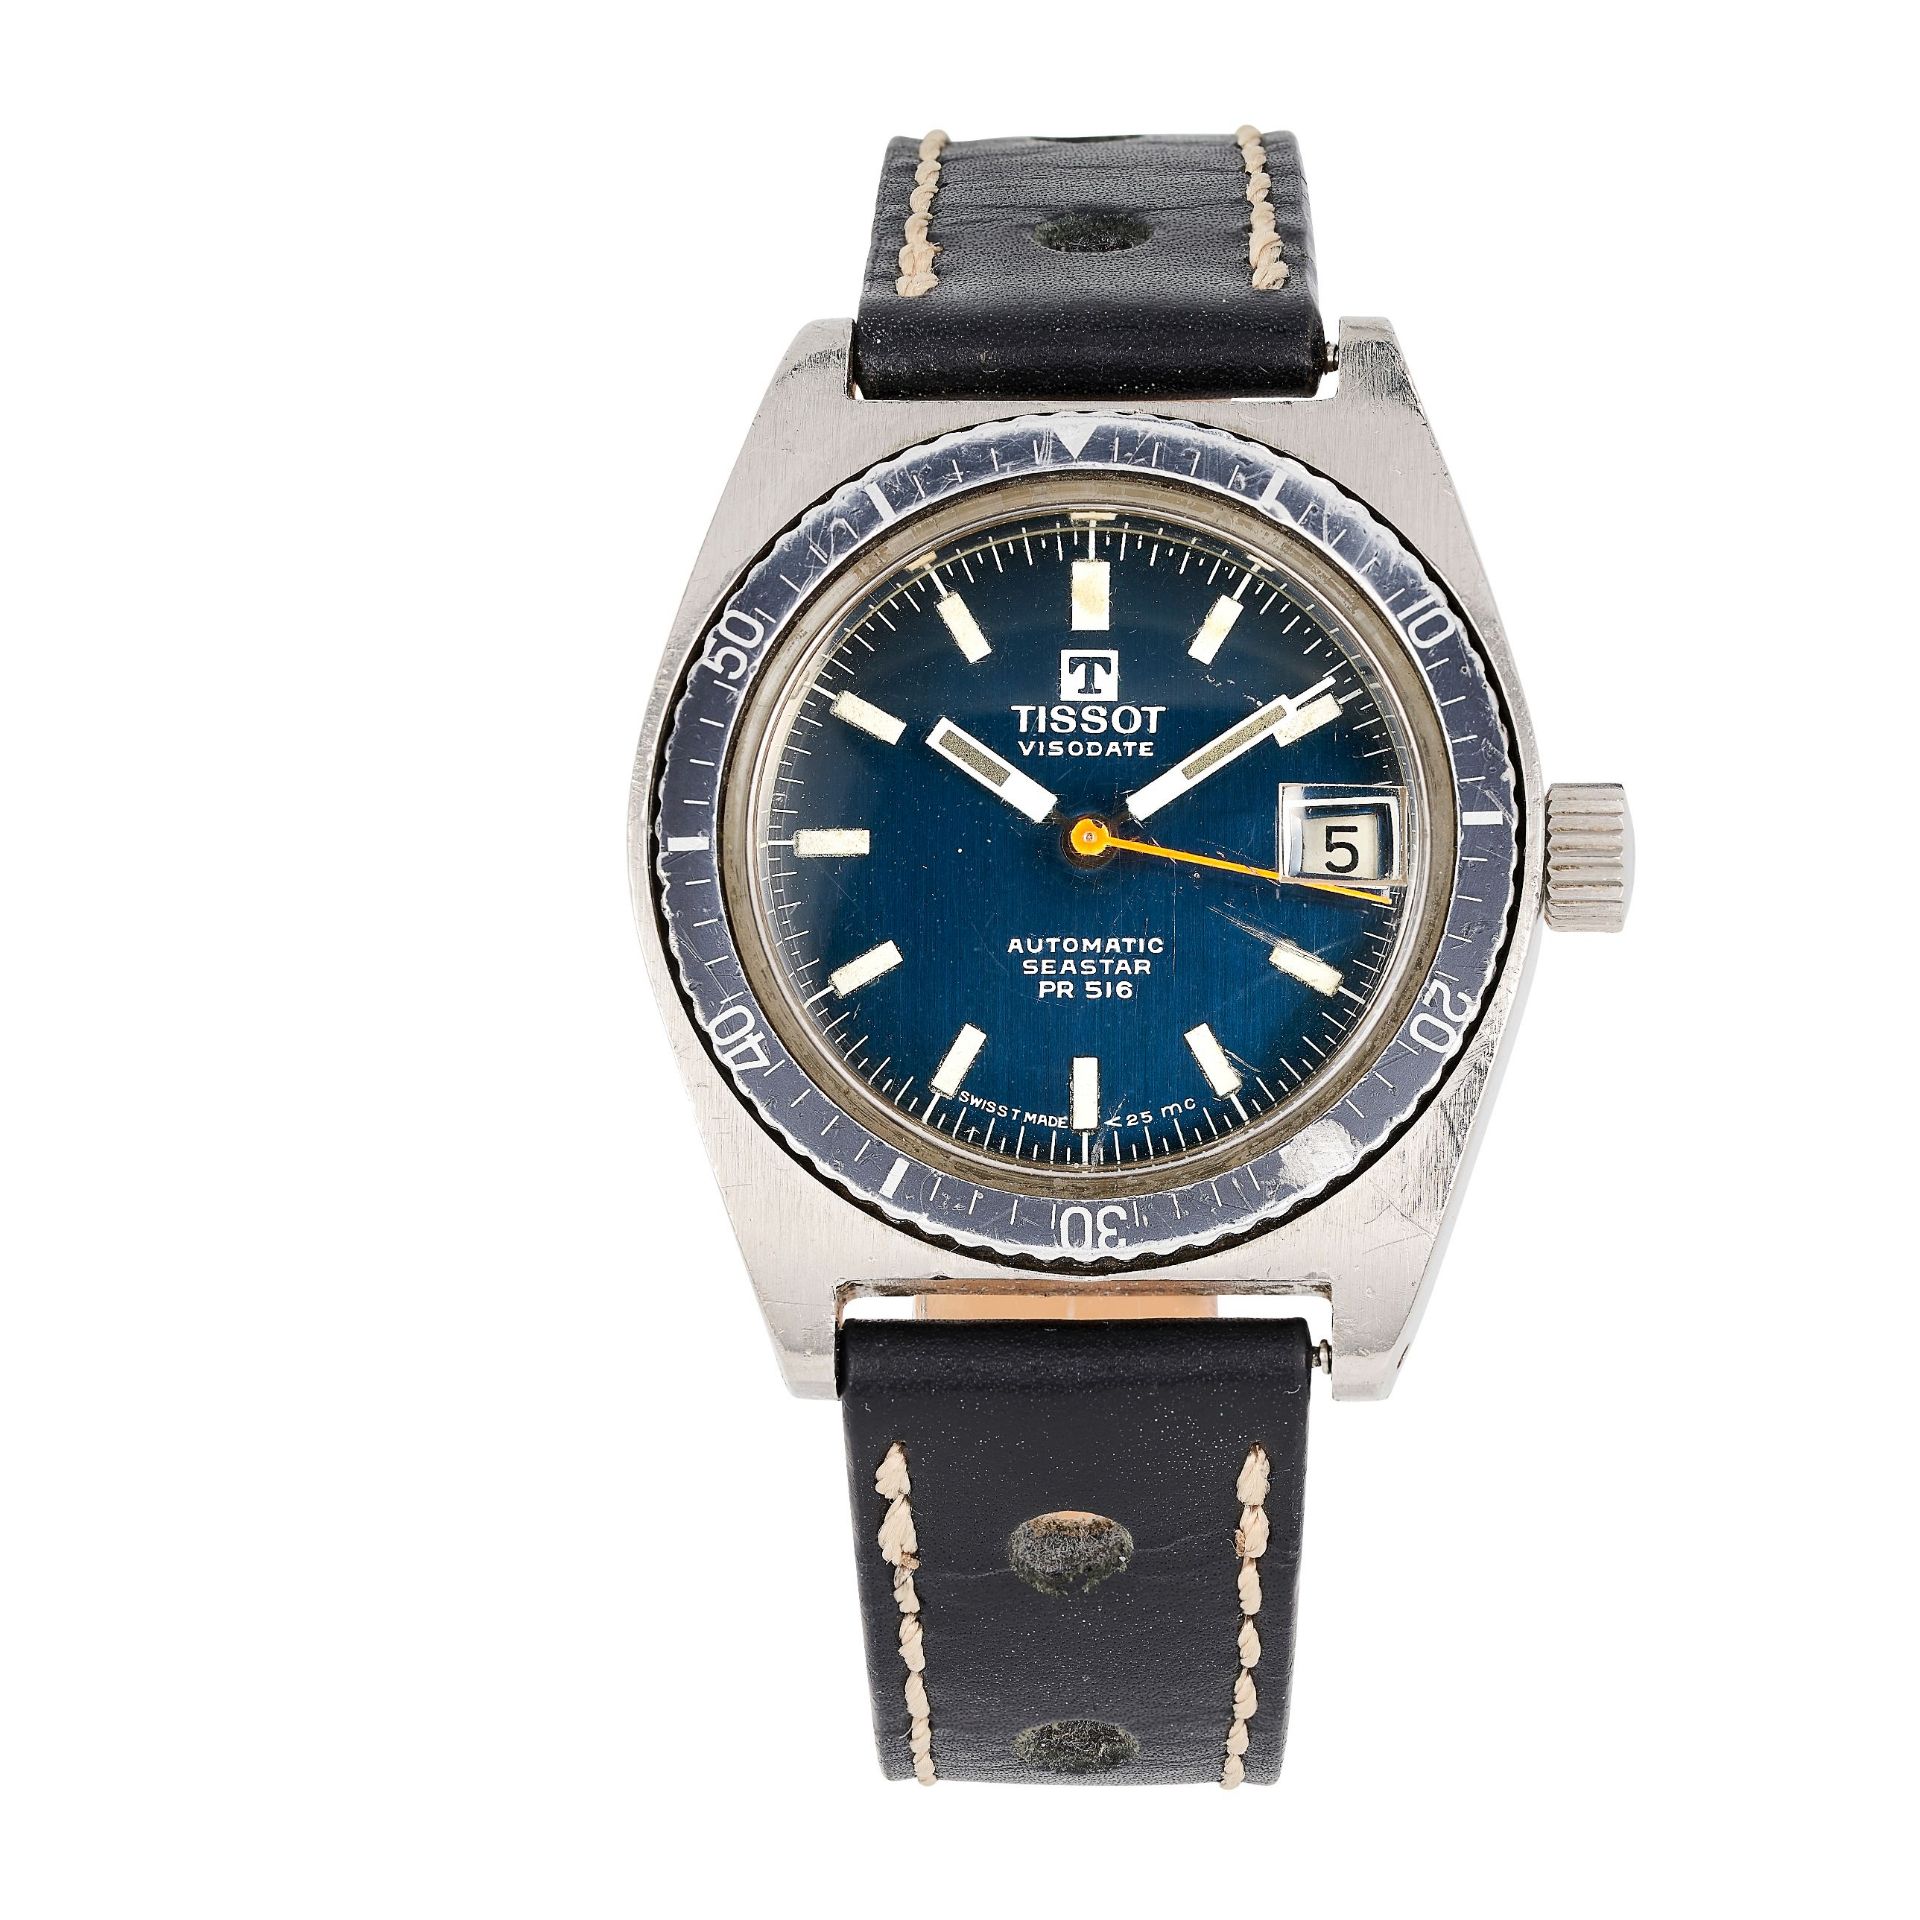 TISSOT, A VINTAGE SEASTAR PR 516 WRISTWATCH, CIRCA 1970s, in stainless steel with blued dial, lume